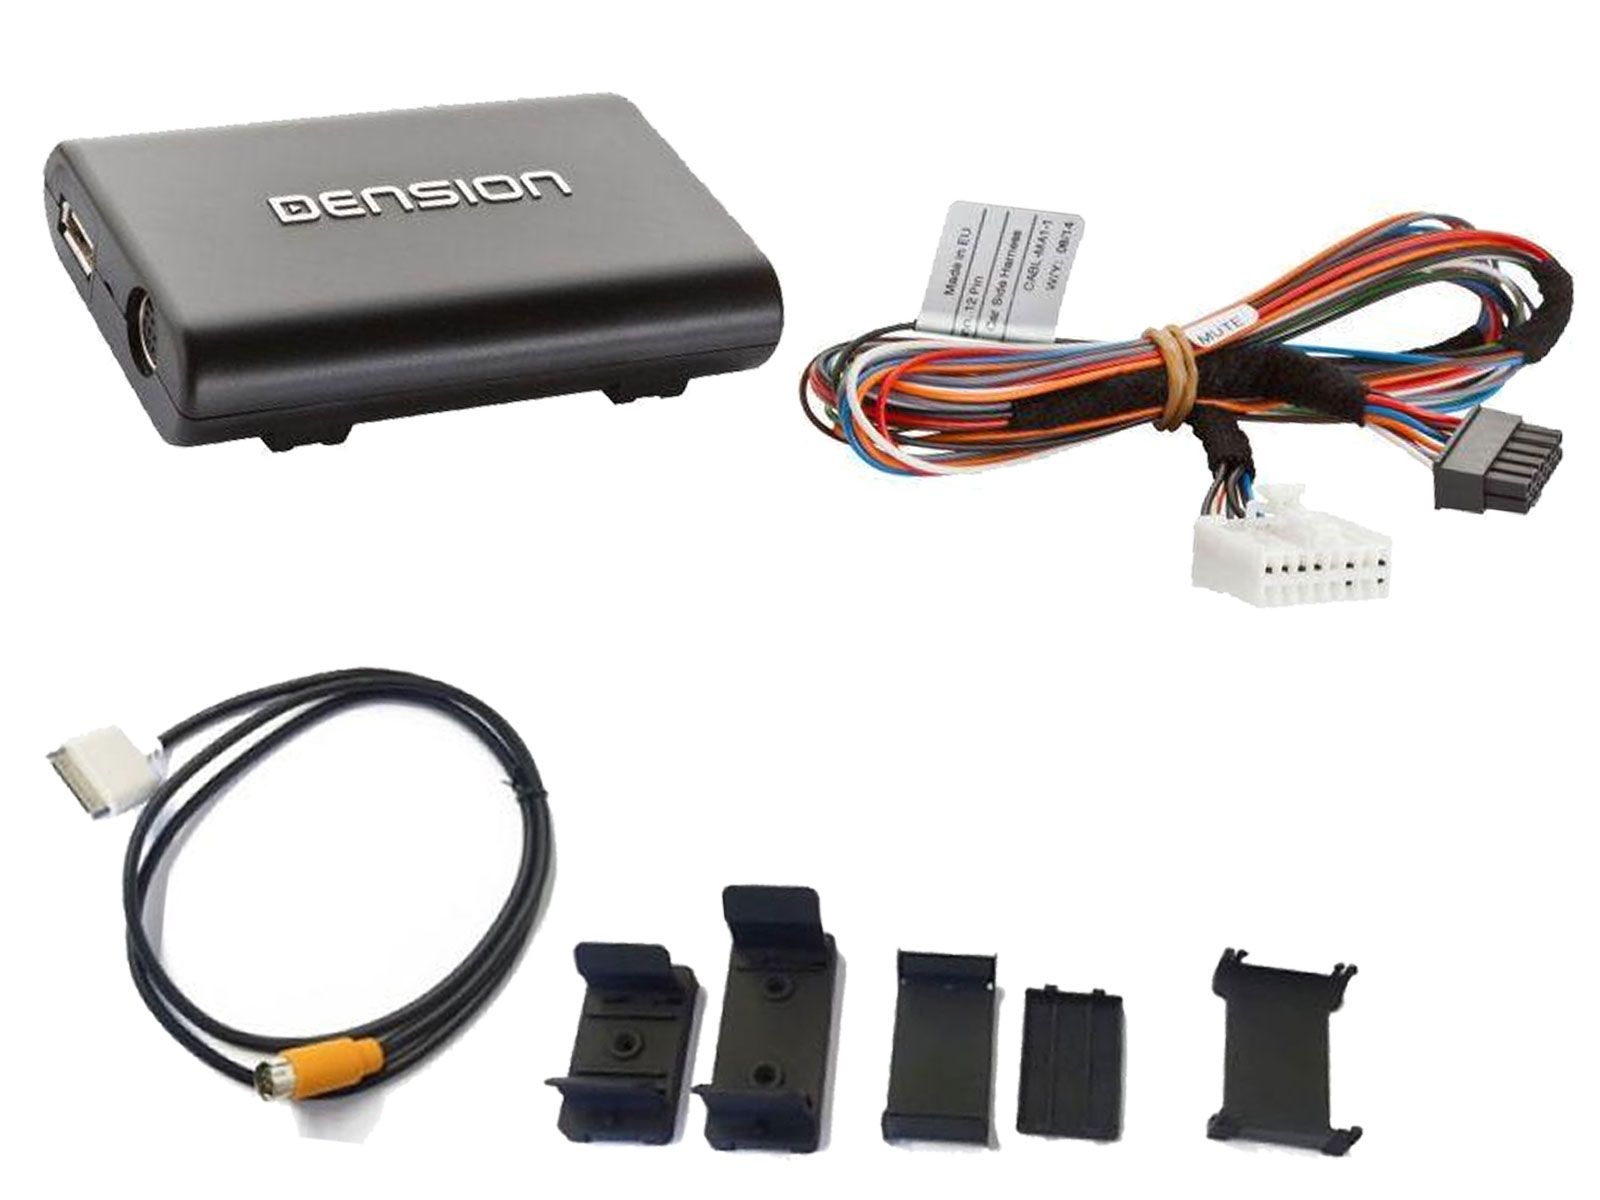 Dension Gateway Lite + Dock Cable - iPod / iPhone / USB Interface - Mazda 2, 3, 6, 121, 323, 626